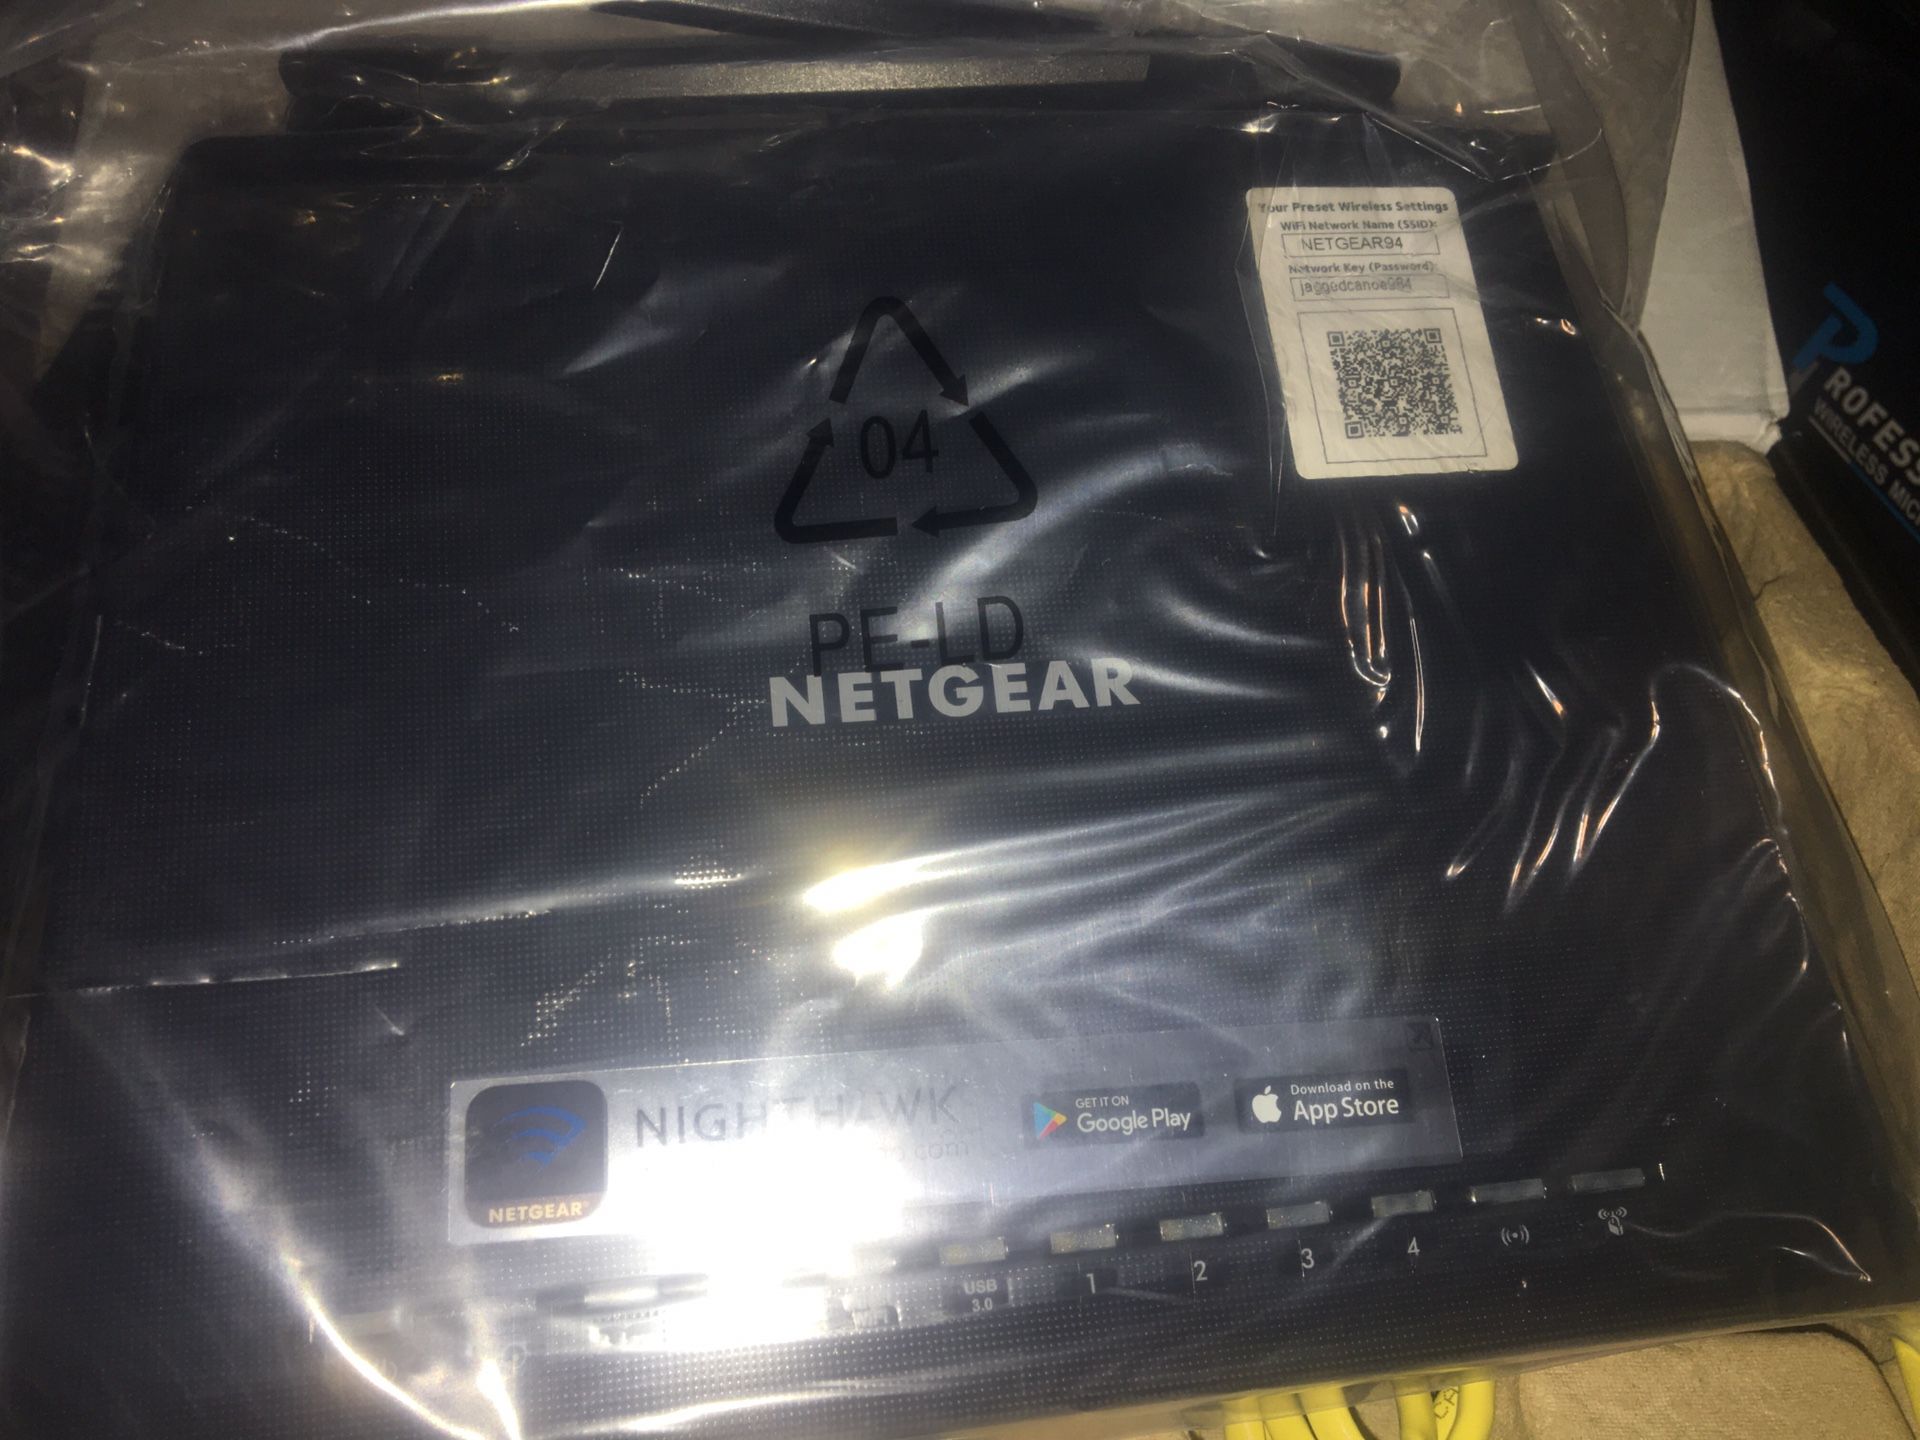 NETGEAR Nighthawk Smart WiFi Router (R6700) - AC1750 Wireless Speed (up to 1750 Mbps) | Up to 1500 sq ft Coverage & 25 Devices | 4 x 1G Ethernet and